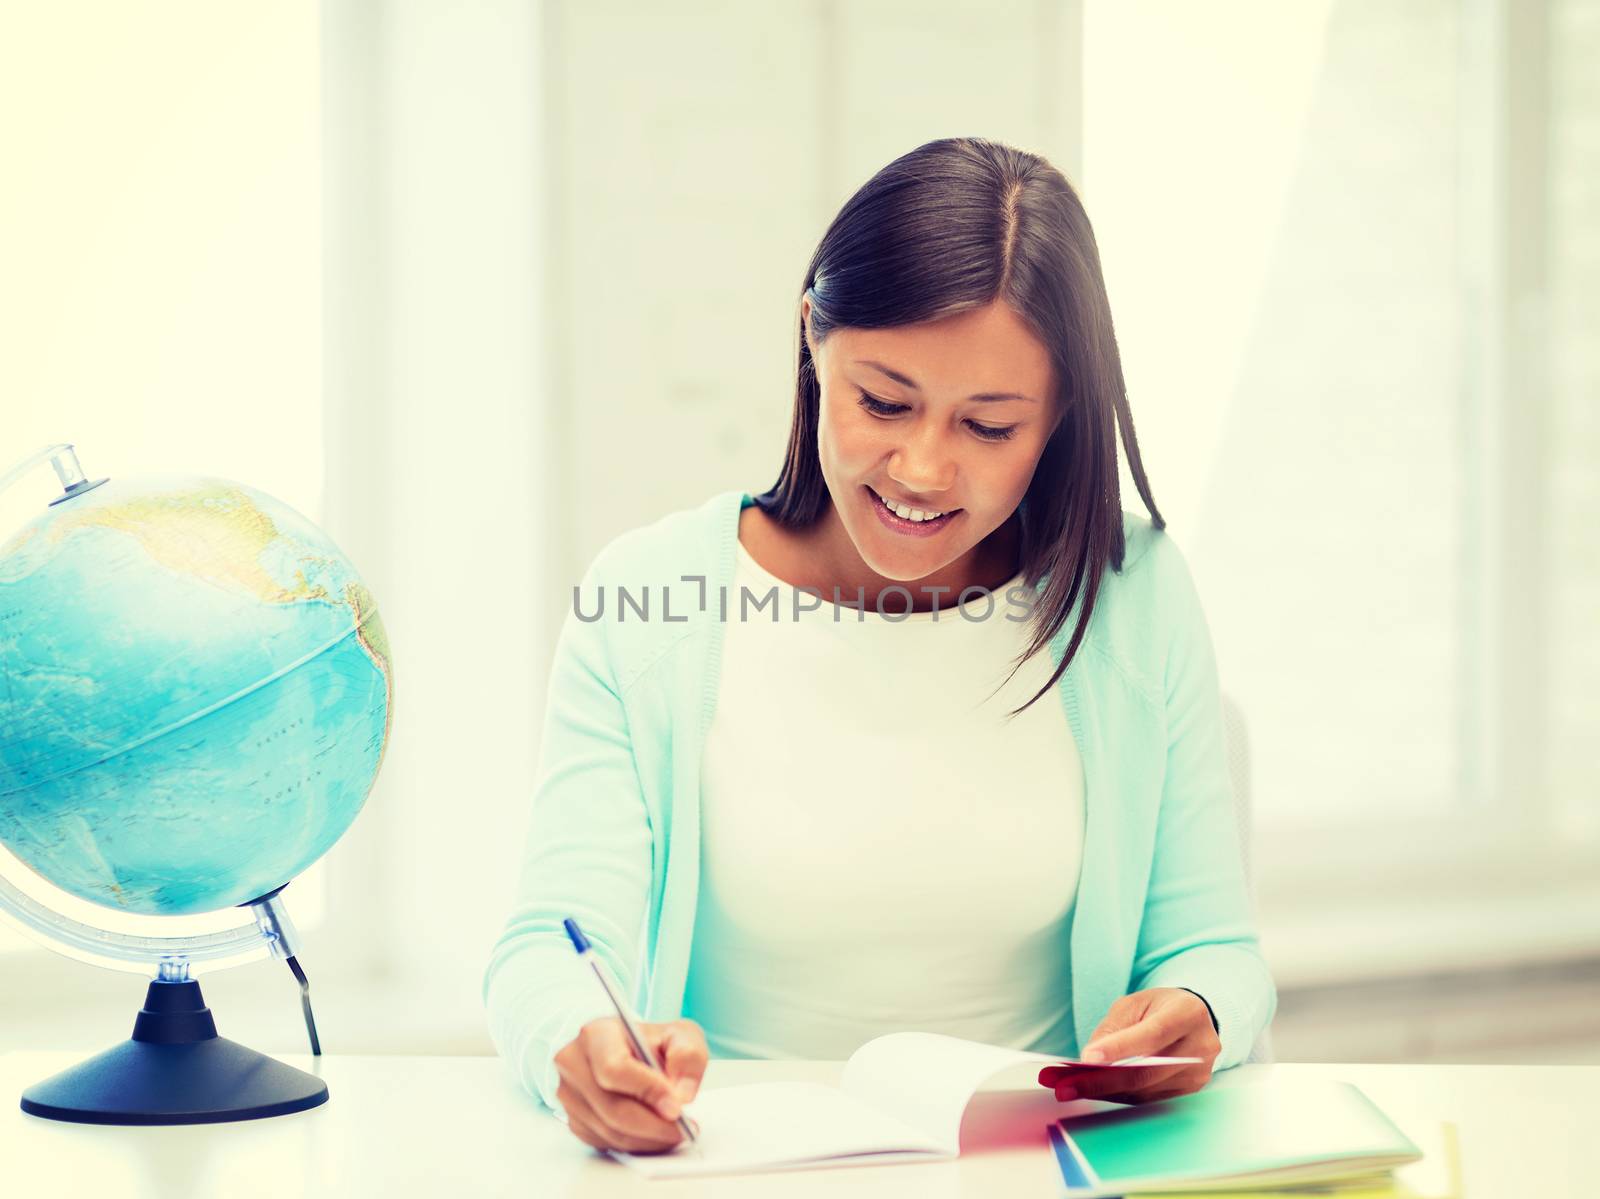 education and school, travel concept - female teacher with globe and notepad